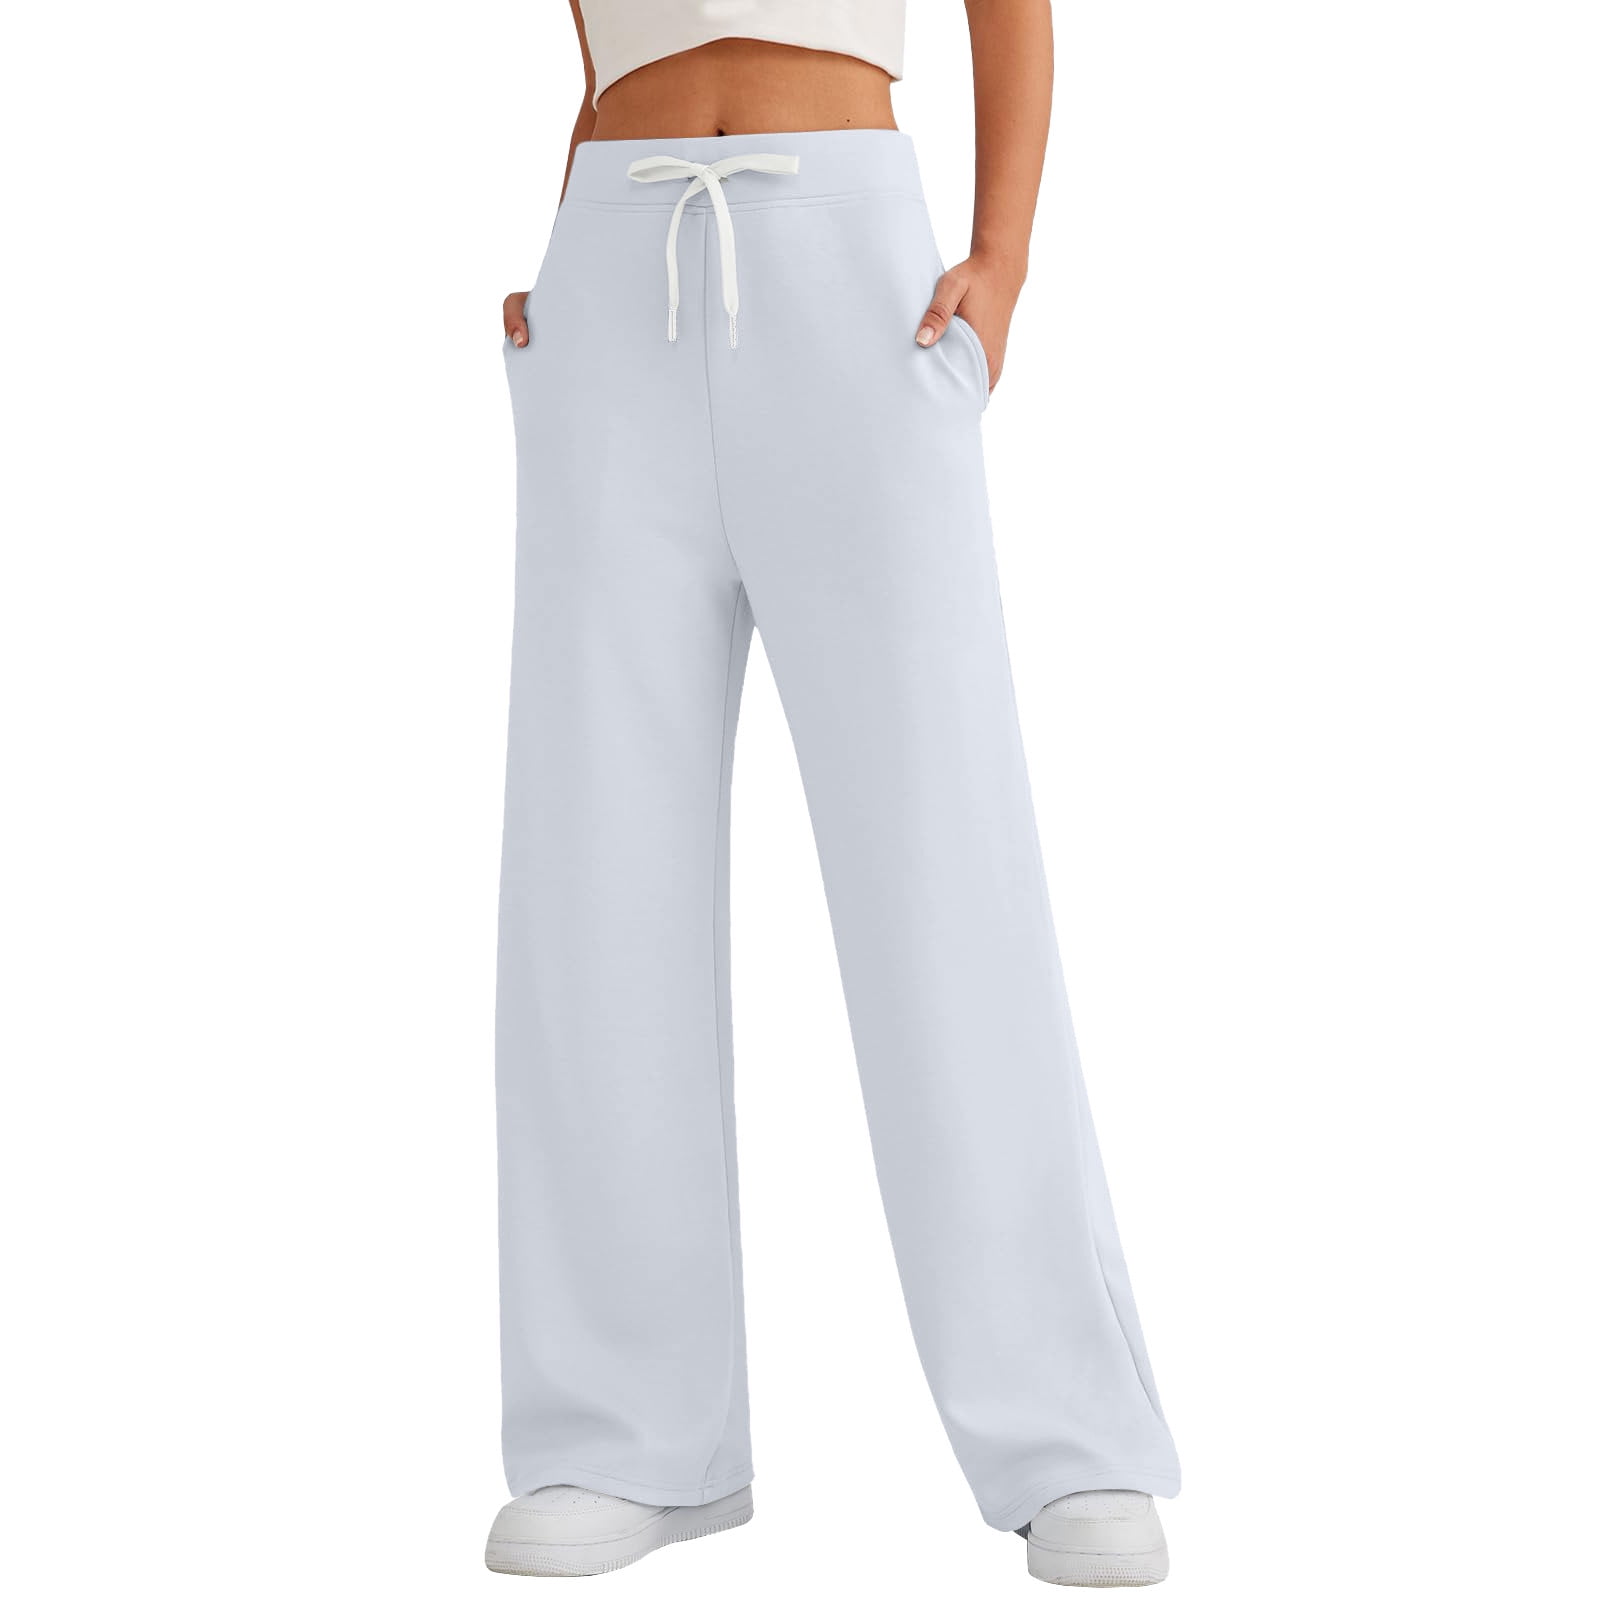 Caicj98 Womens Sweatpants Women's Causal Drawstring High Waist Baggy Straight Leg Joggers Sweatpants with Pockets White,S, Adult Unisex, Size: Small